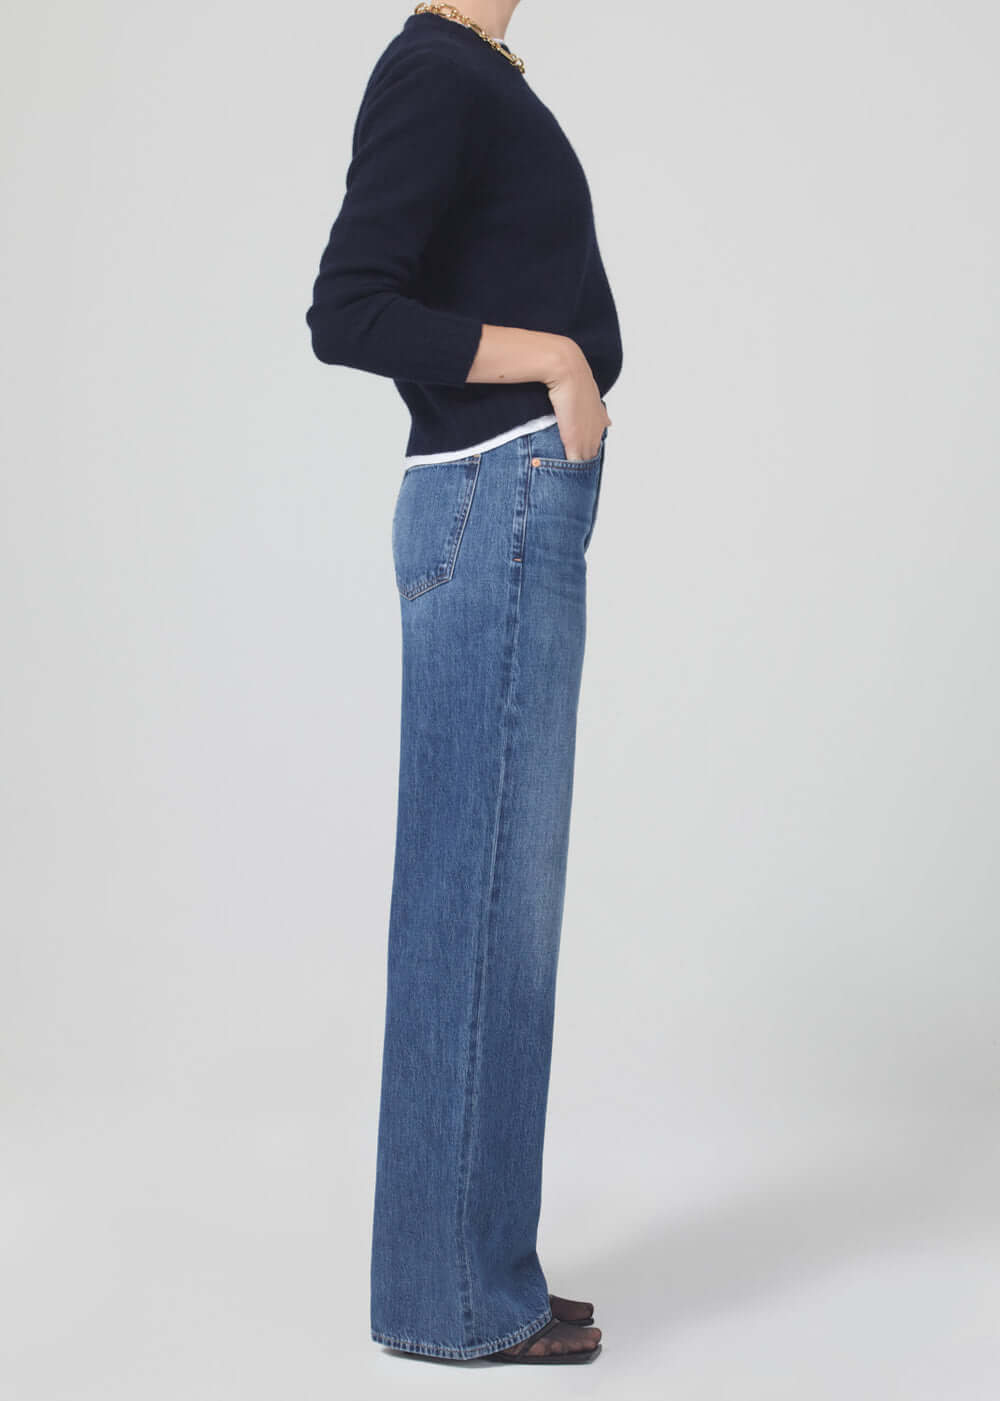 Citizens Of Humanity Annina Trouser Jean in Pinnacle available at TNT The New Trend Australia.